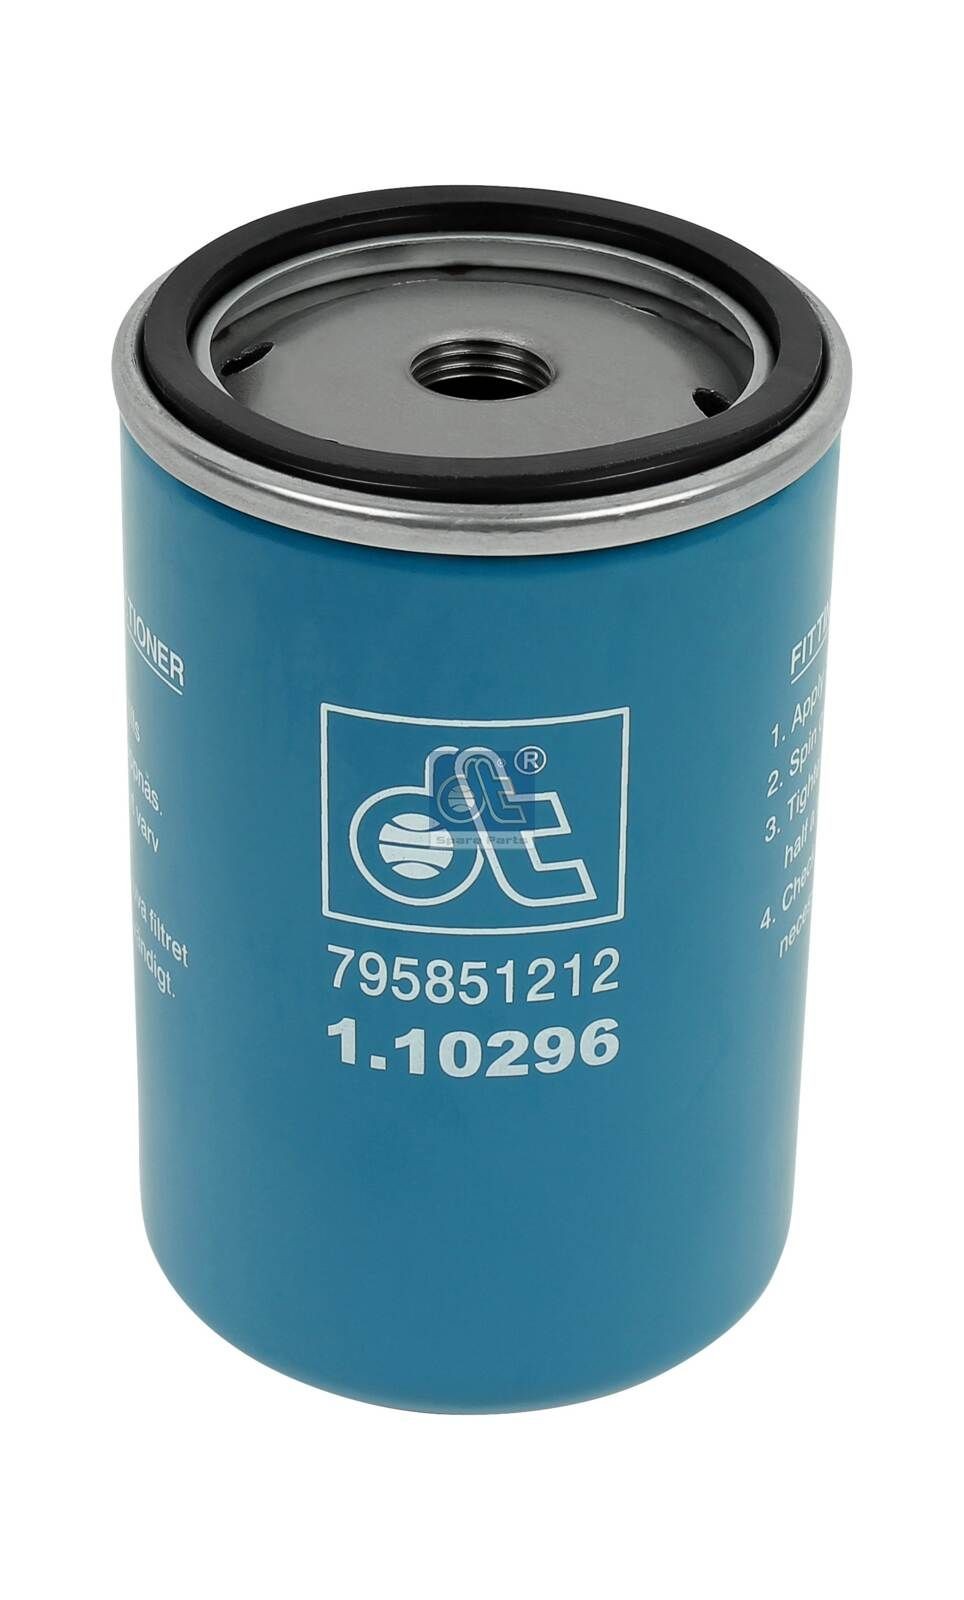 WK 723/1 DT Spare Parts 1.10296 Fuel filter A-77470